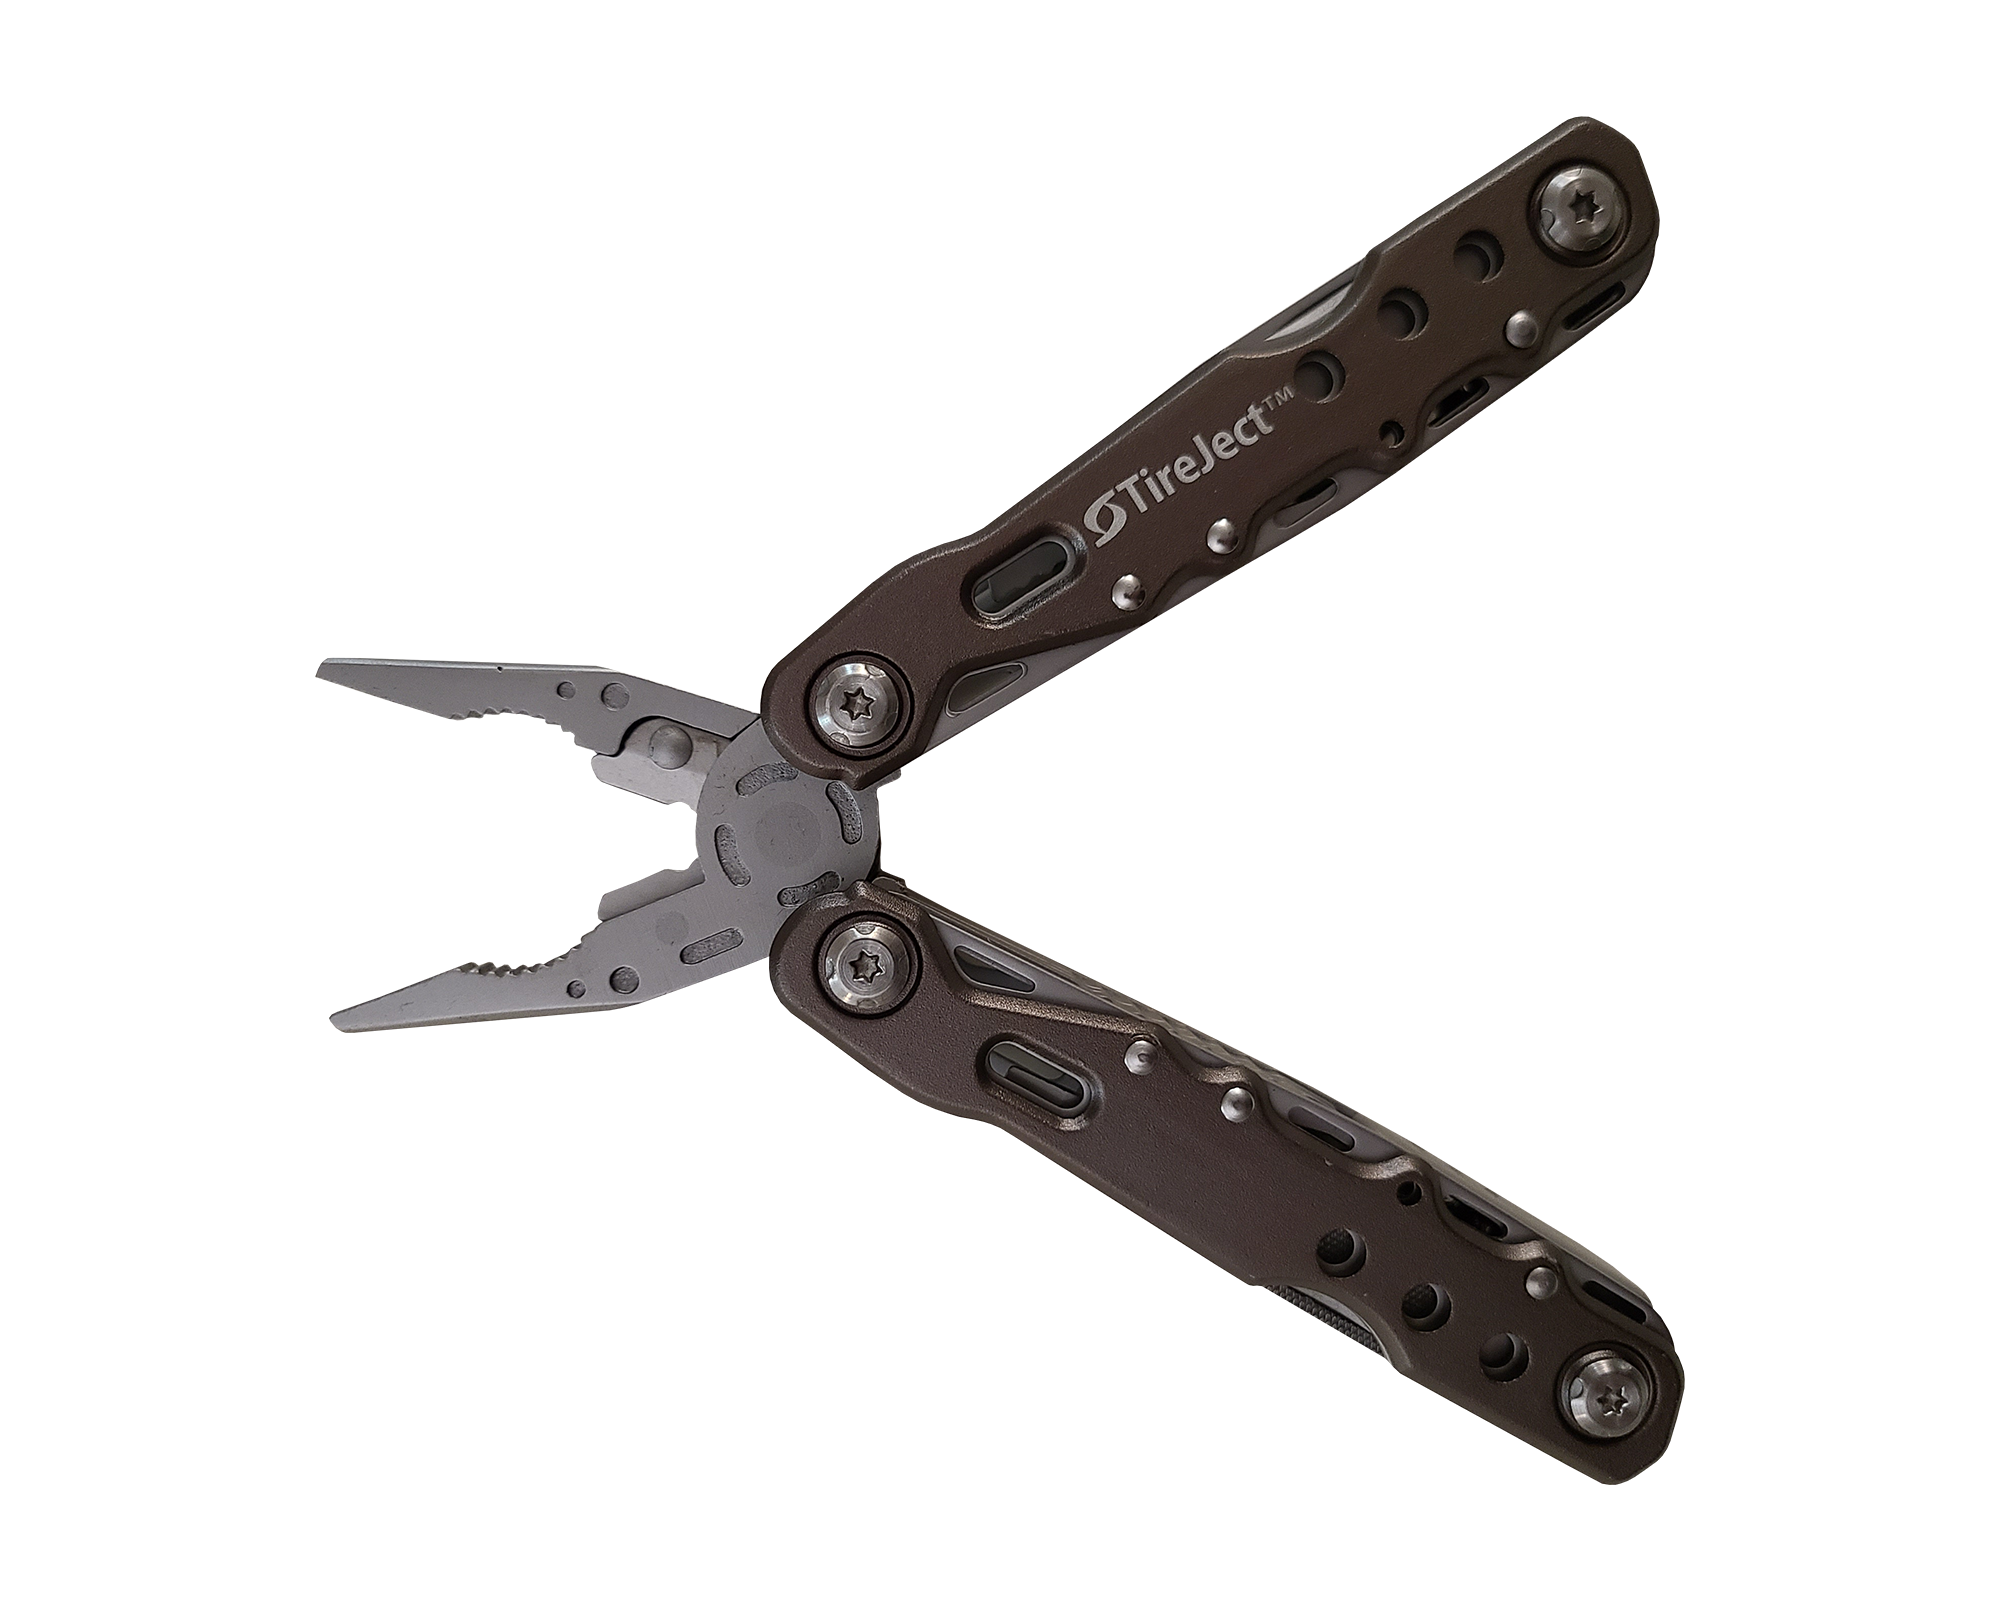 11-in-1 Pocket Multi-Tool  Knife, Pliers, Saw & More